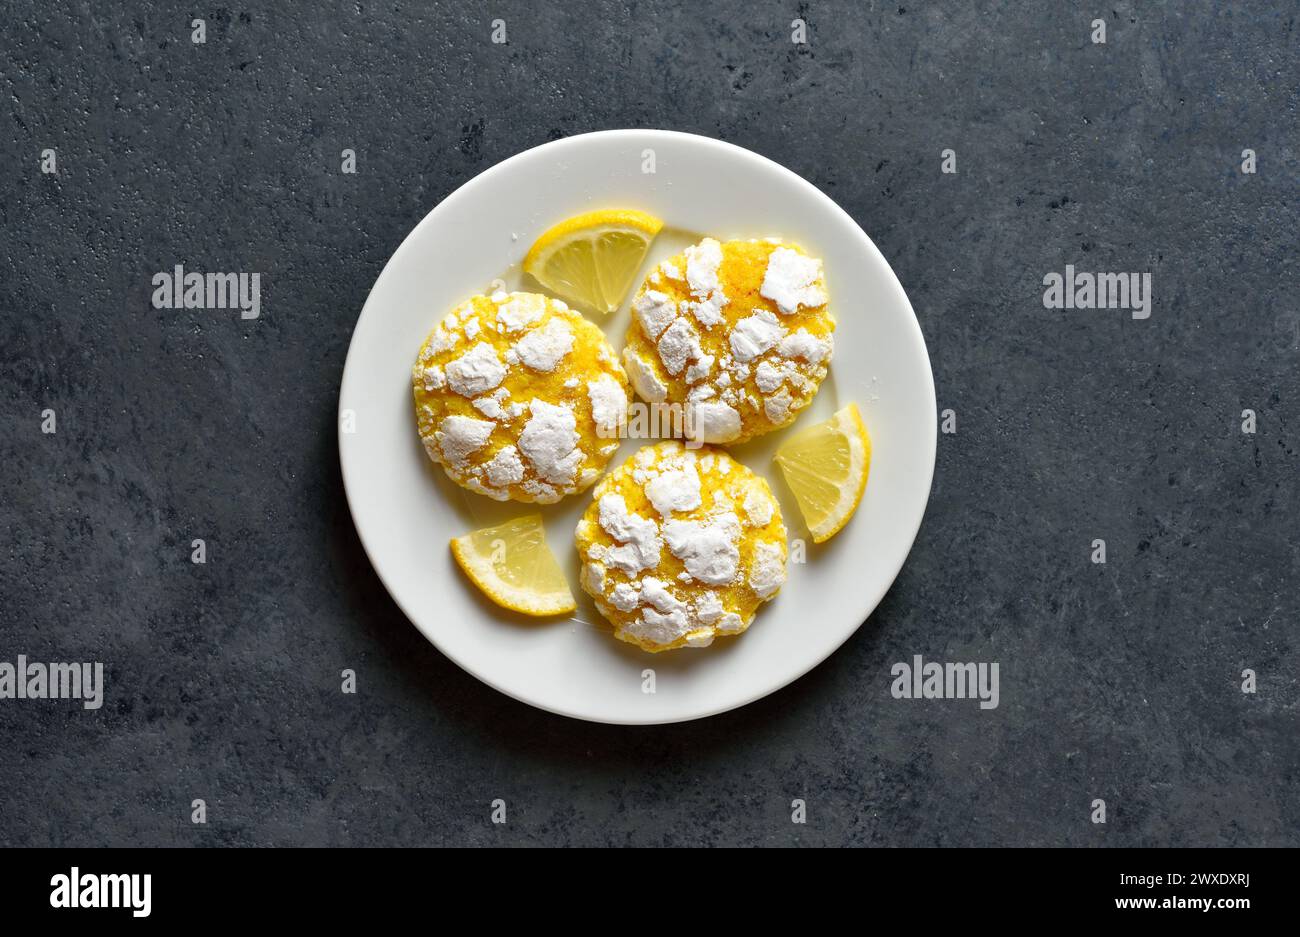 Lemon crinkle cookies on plate over dark stone background. Top view, flat lay Stock Photo